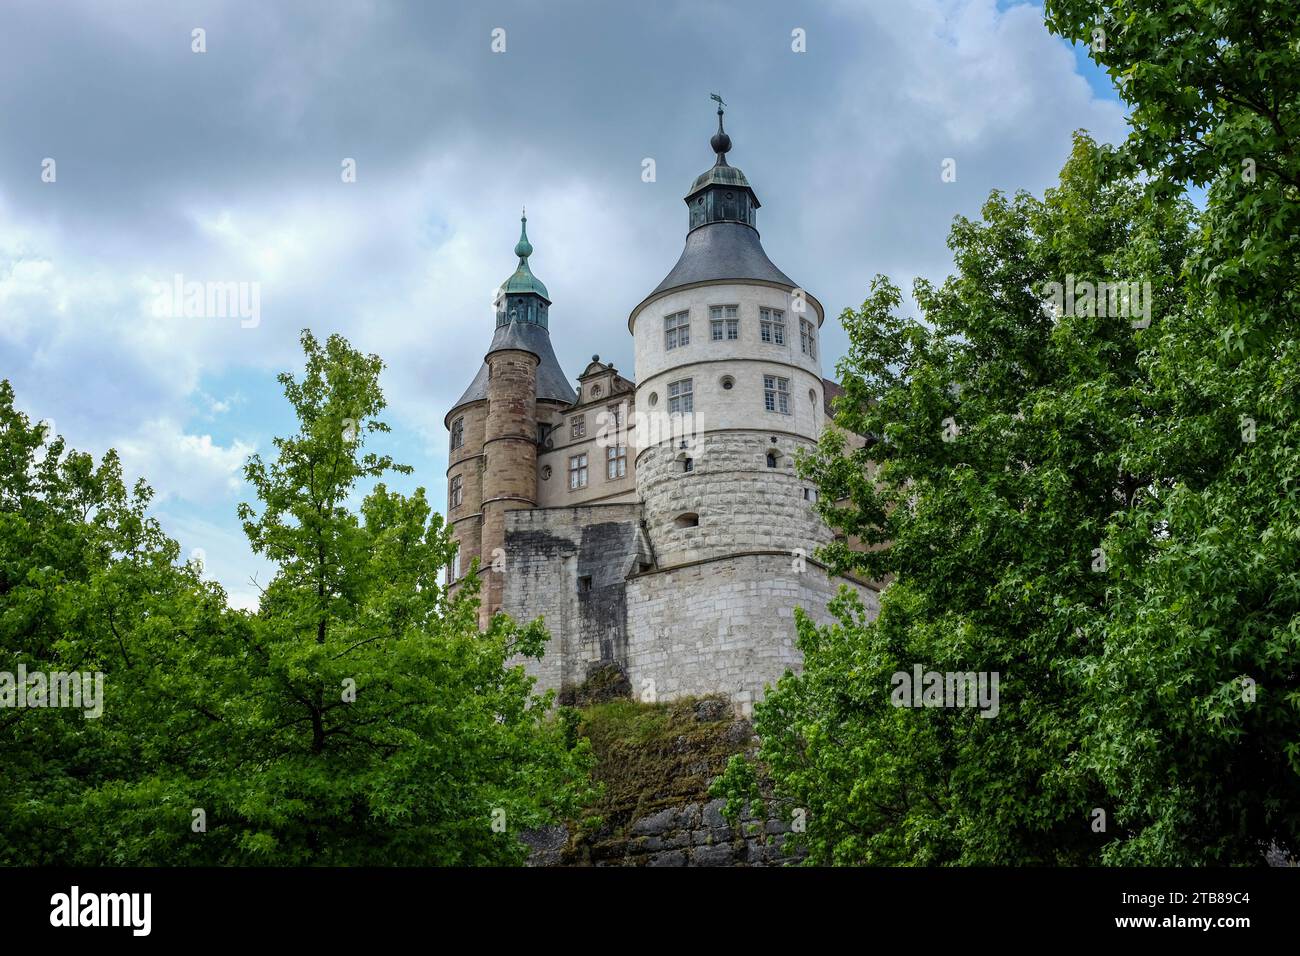 Montbeliard (north-eastern France): the Chateau de Montbeliard (Montbeliard Castle), also known as the Chateau des ducs de Wurttemberg (Castle of the Stock Photo